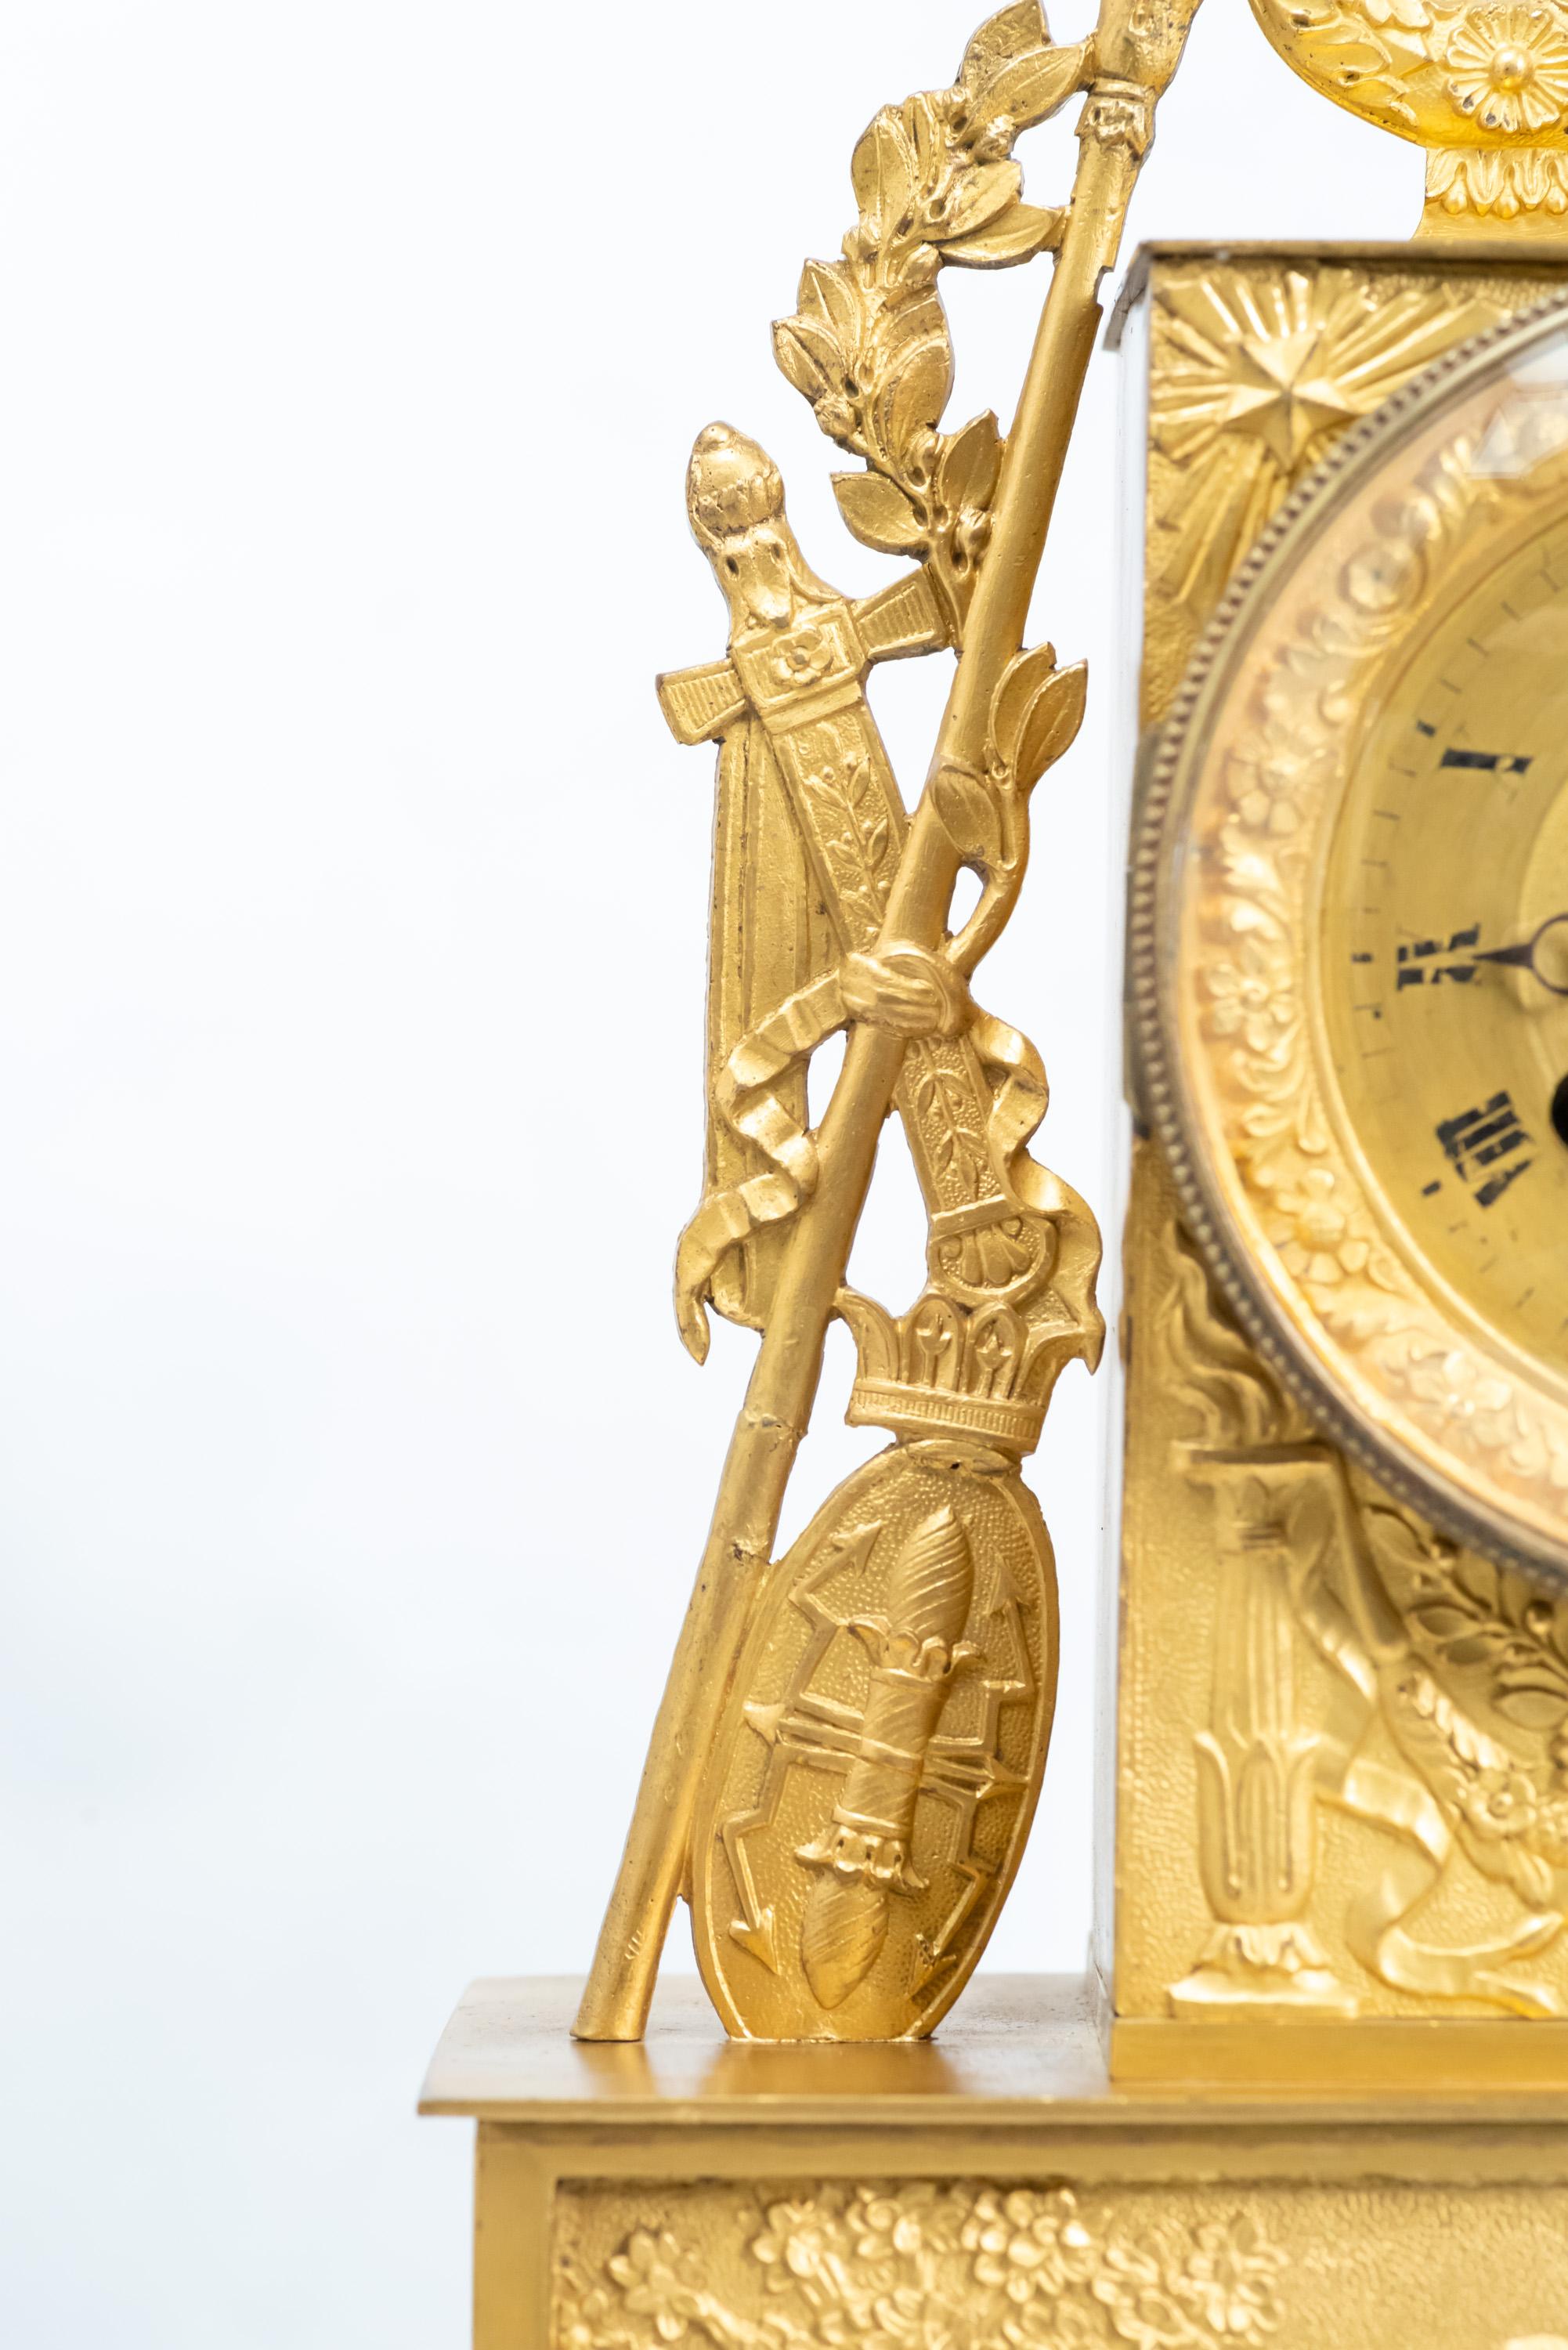 A Restauration Era Fire-Gilt Mantle Clock with Figures of Venus and Cupid For Sale 7